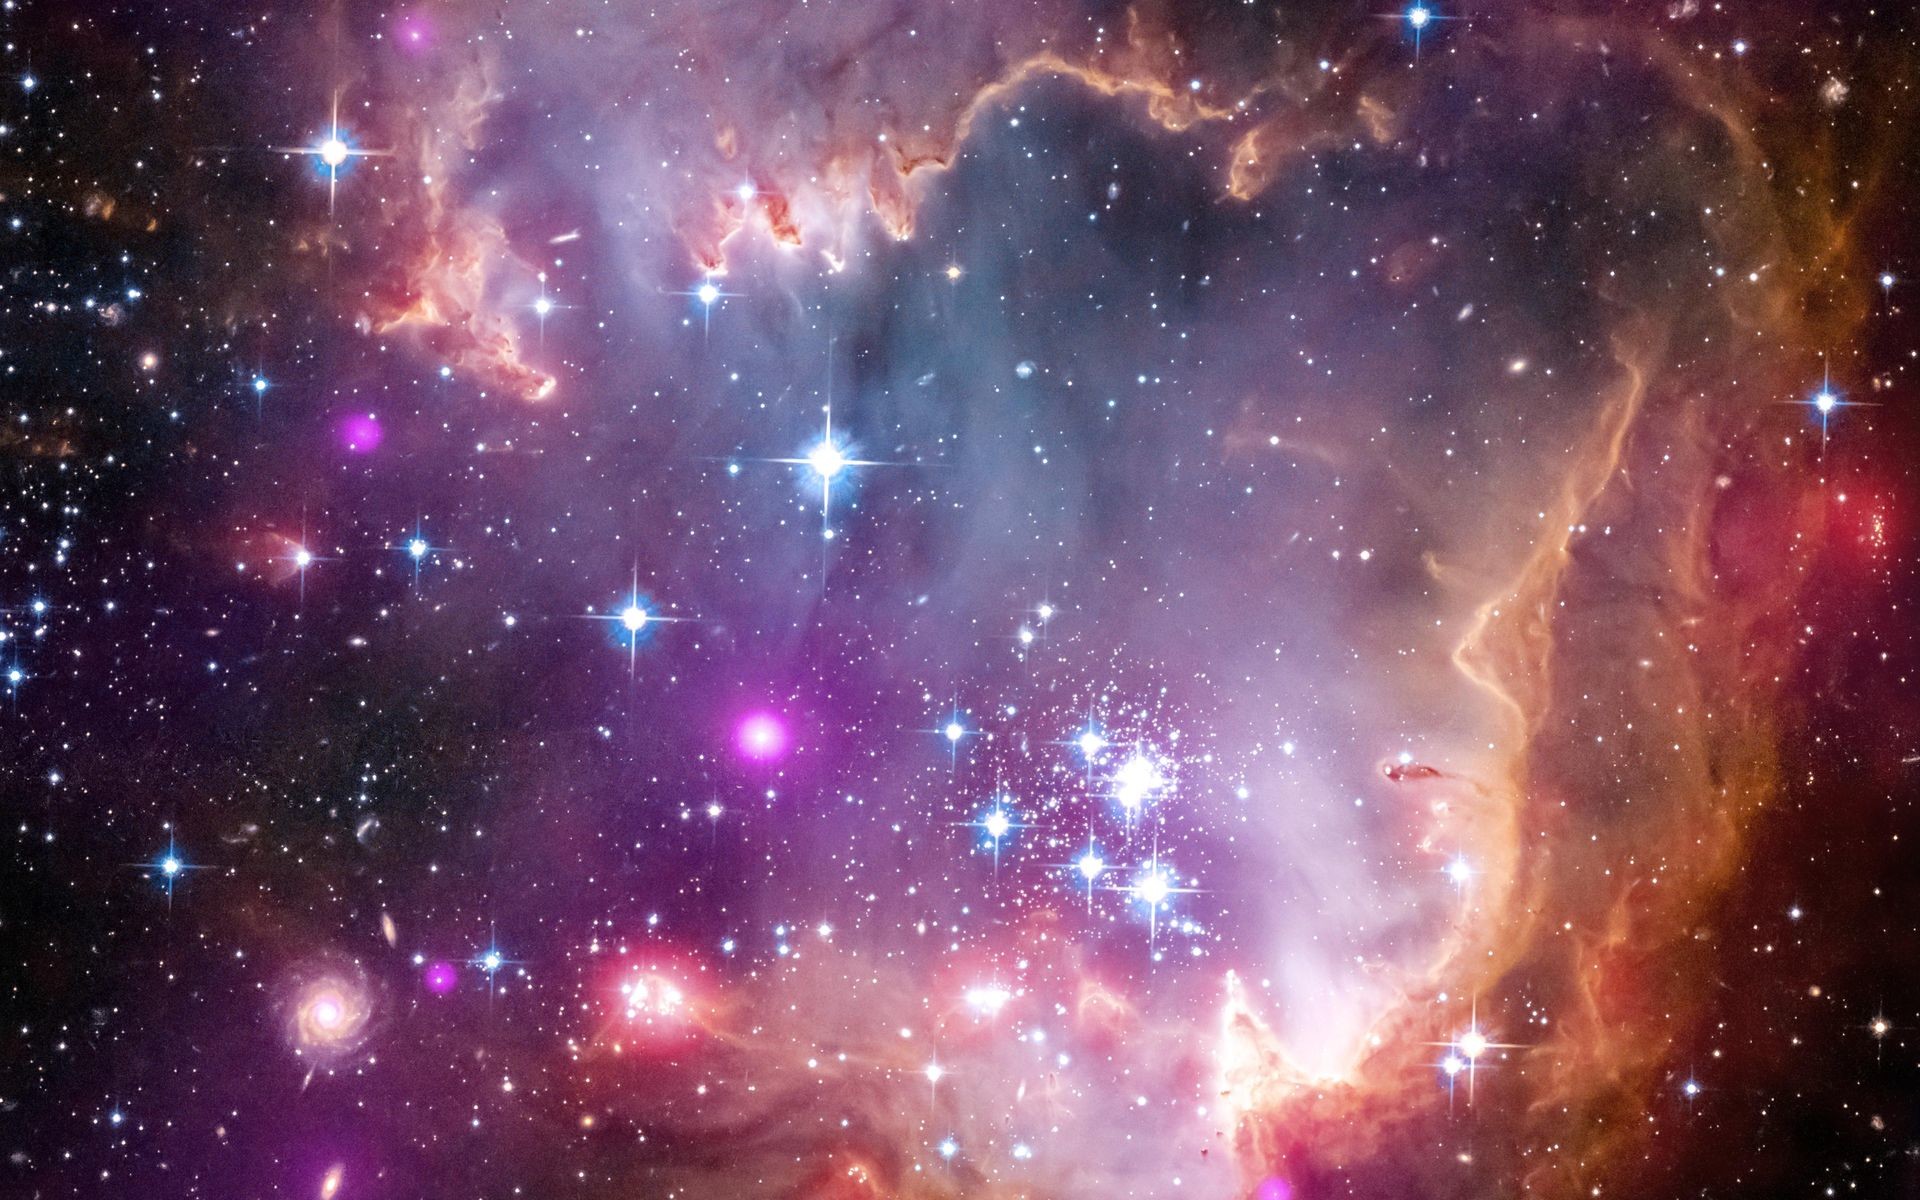 1920x1200 The tip of the 'wing' of the Small Magellanic Cloud galaxy is dazzling in